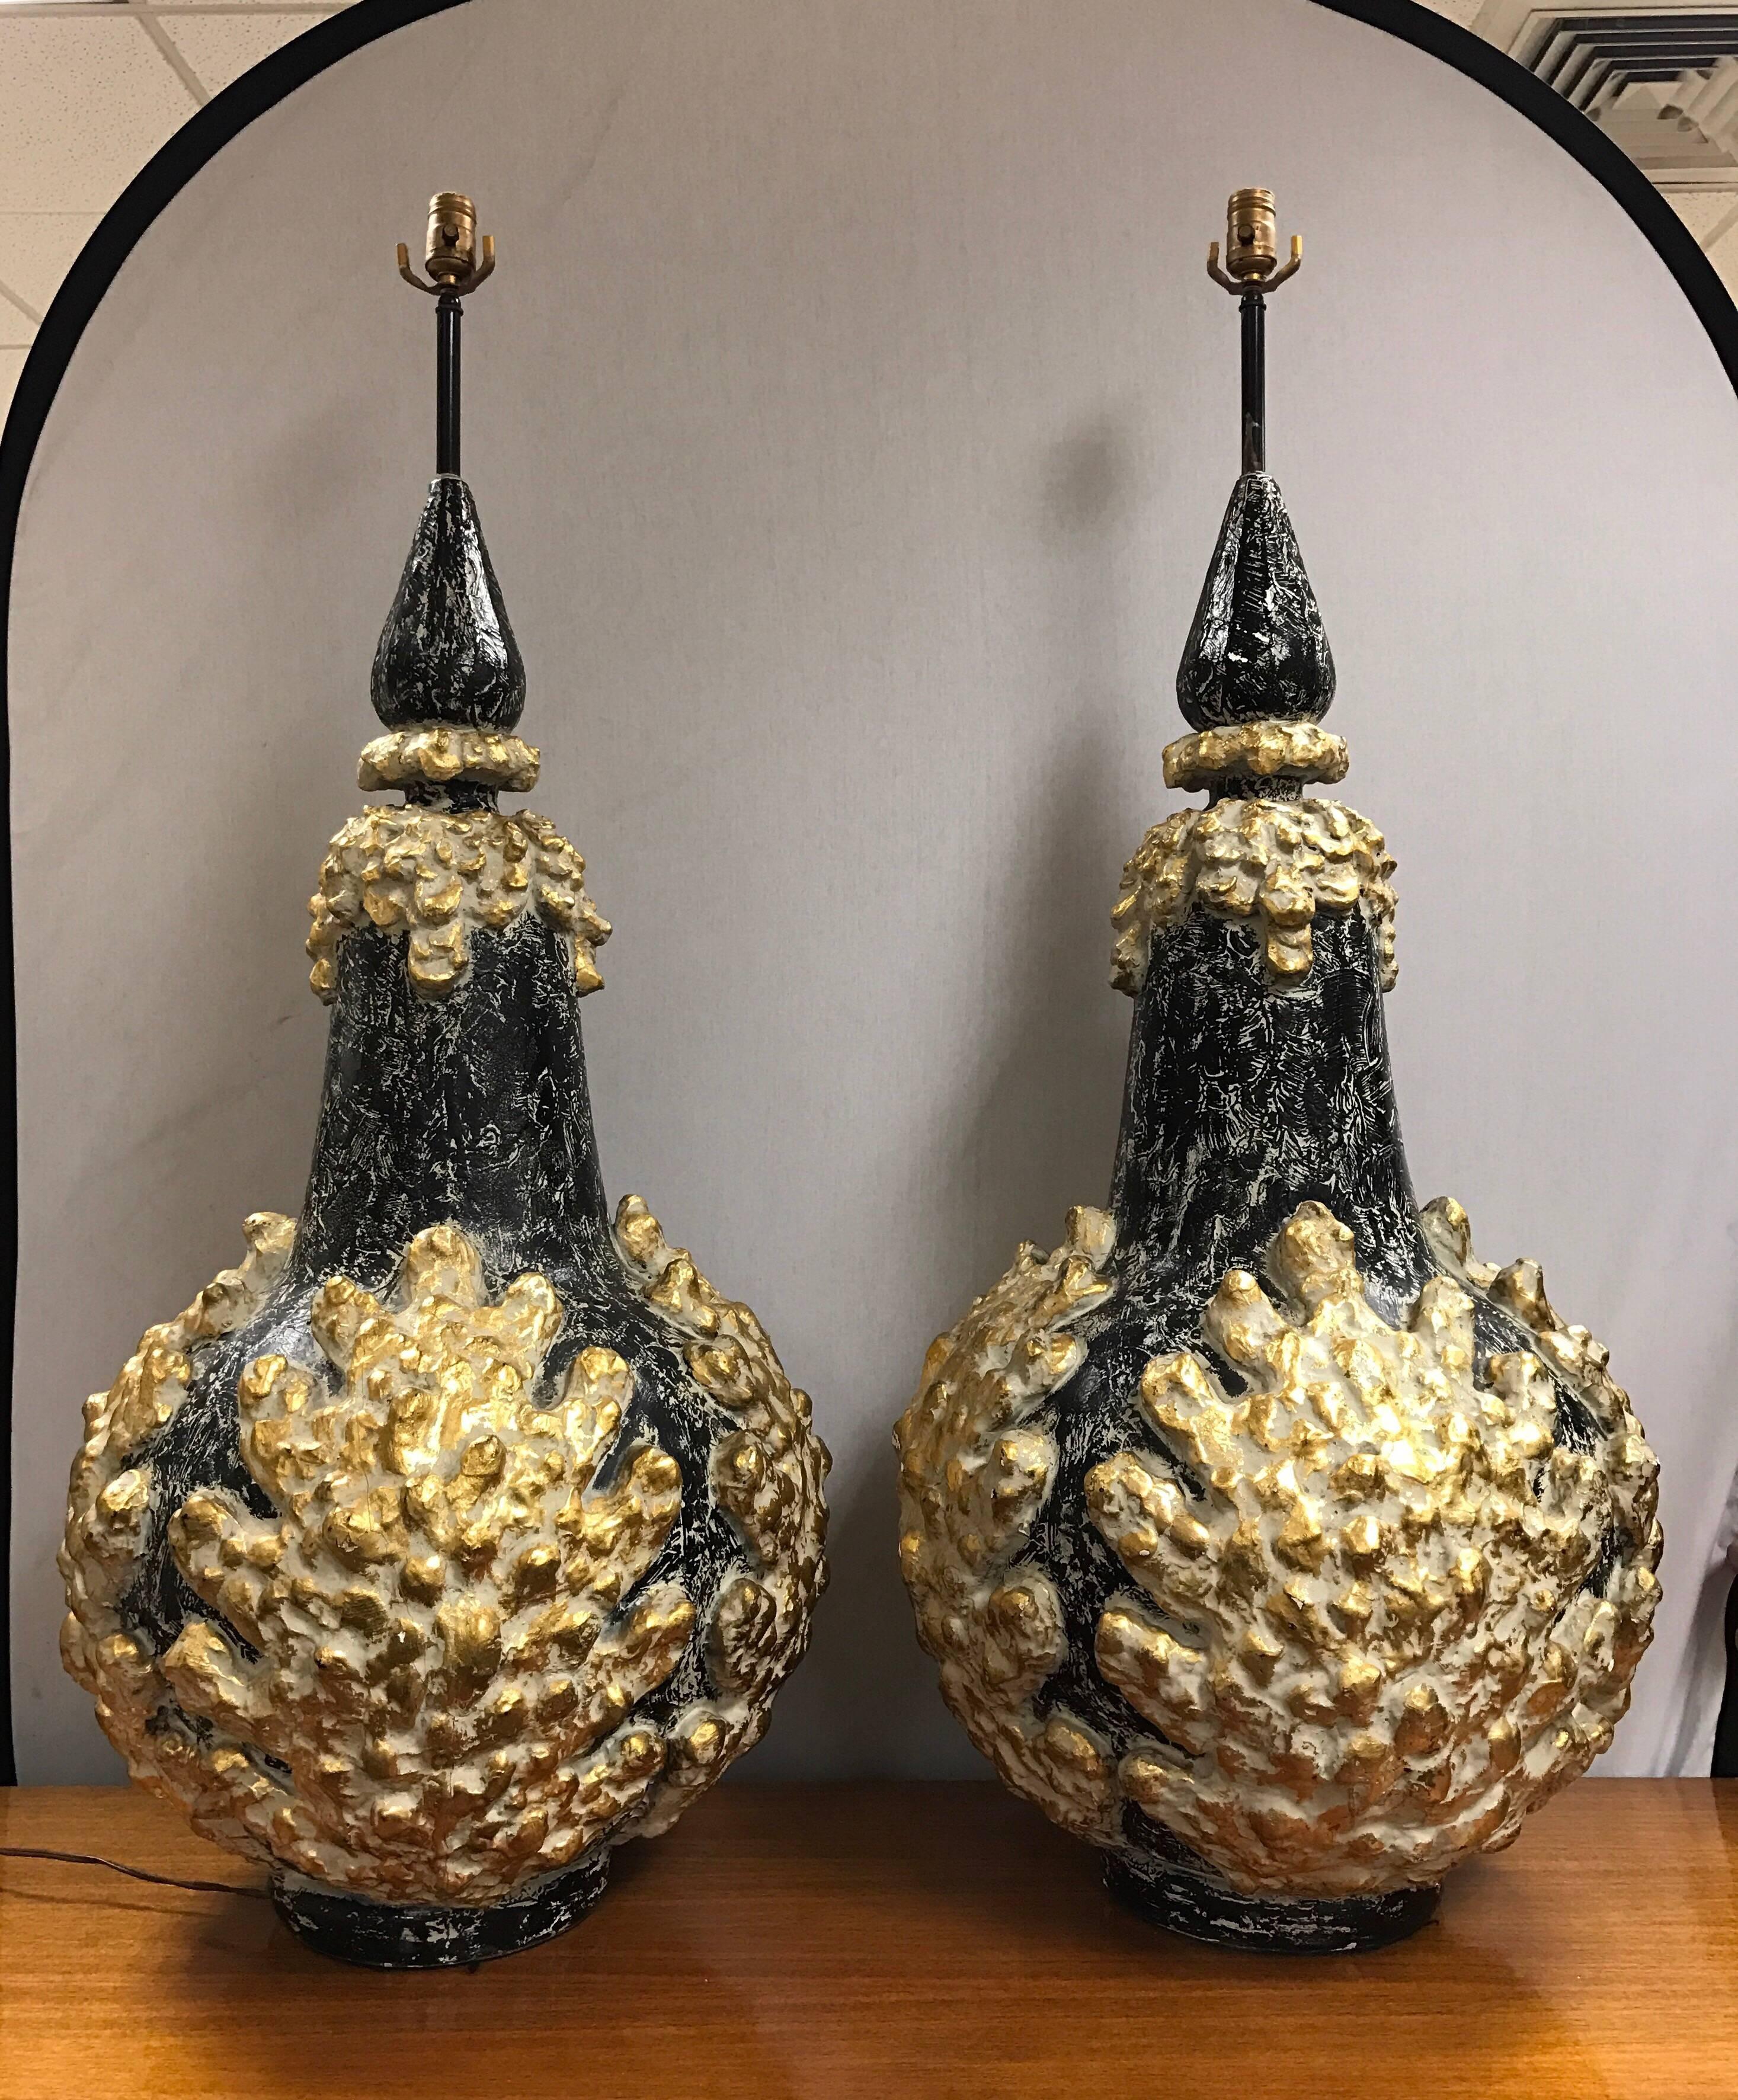 Matched pair of monumental midcentury table lamps in black and gold plaster in a textured design.
Wired for use in USA and in working condition. Very heavy at approximately 40 pounds per lamp.
One of a kind!